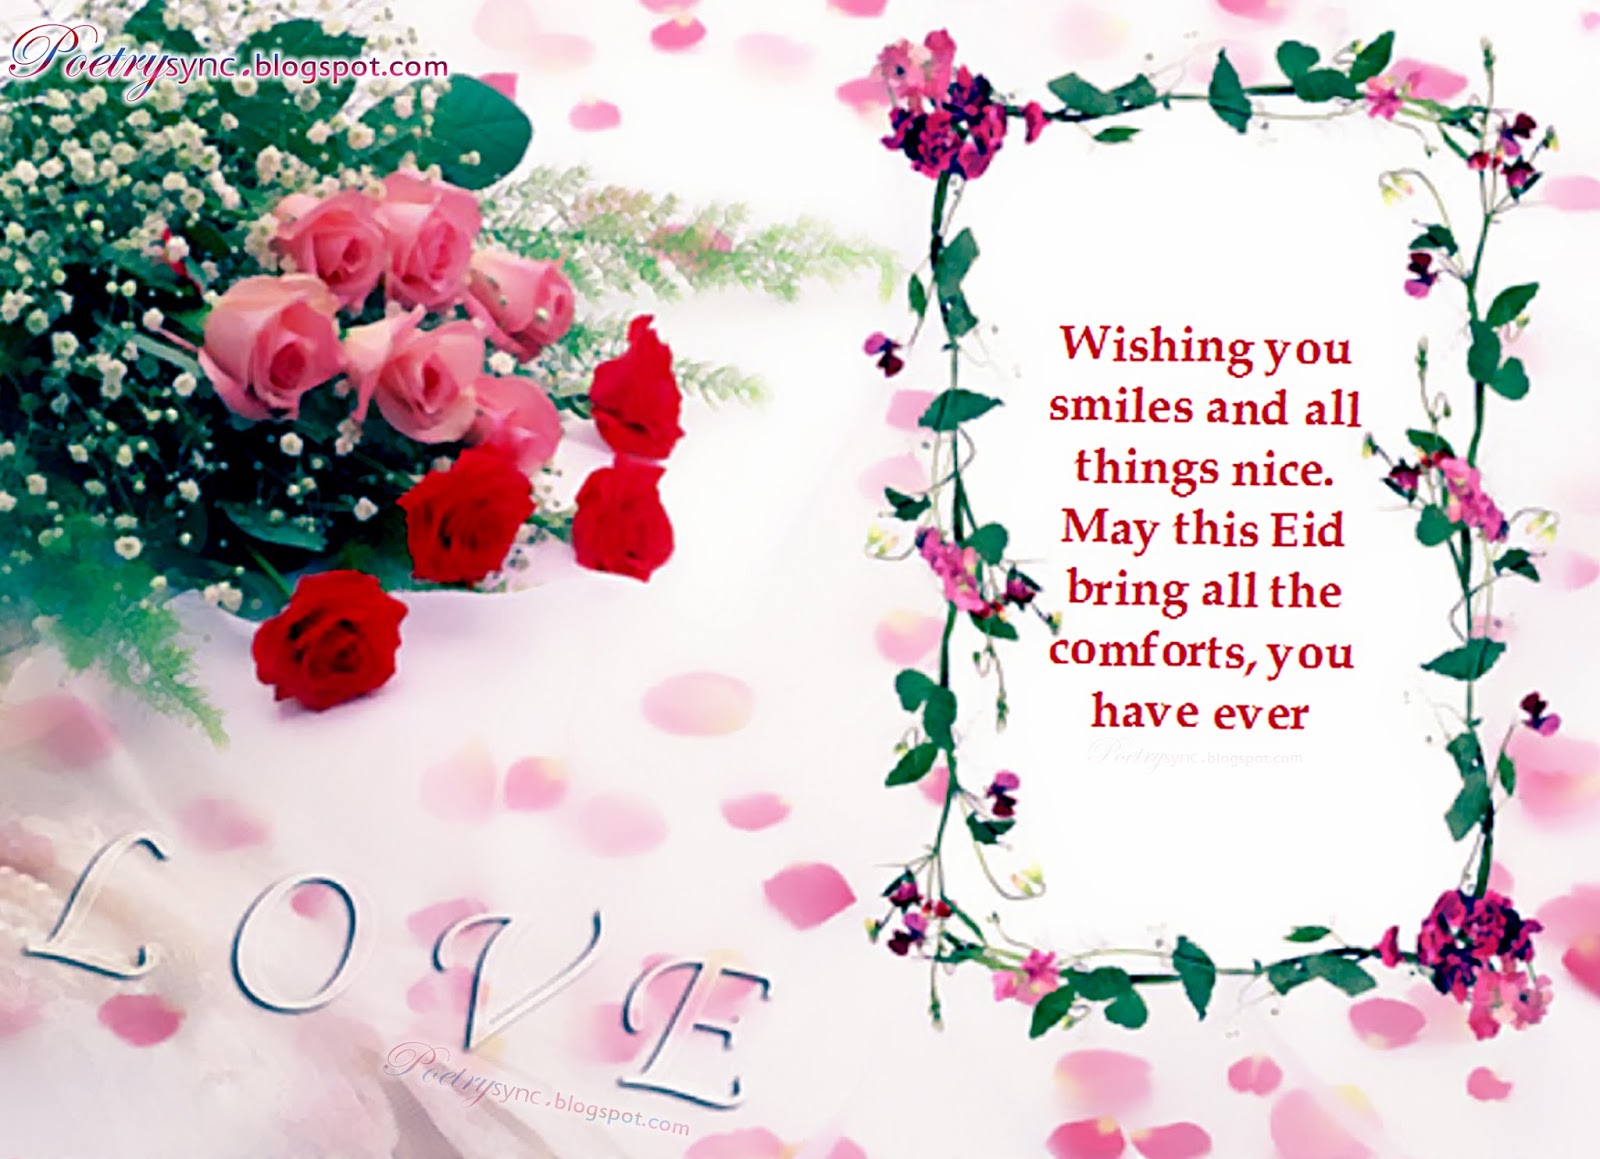 Eid Ul-Fitr Warm wishes with images and quotes | messages to share on